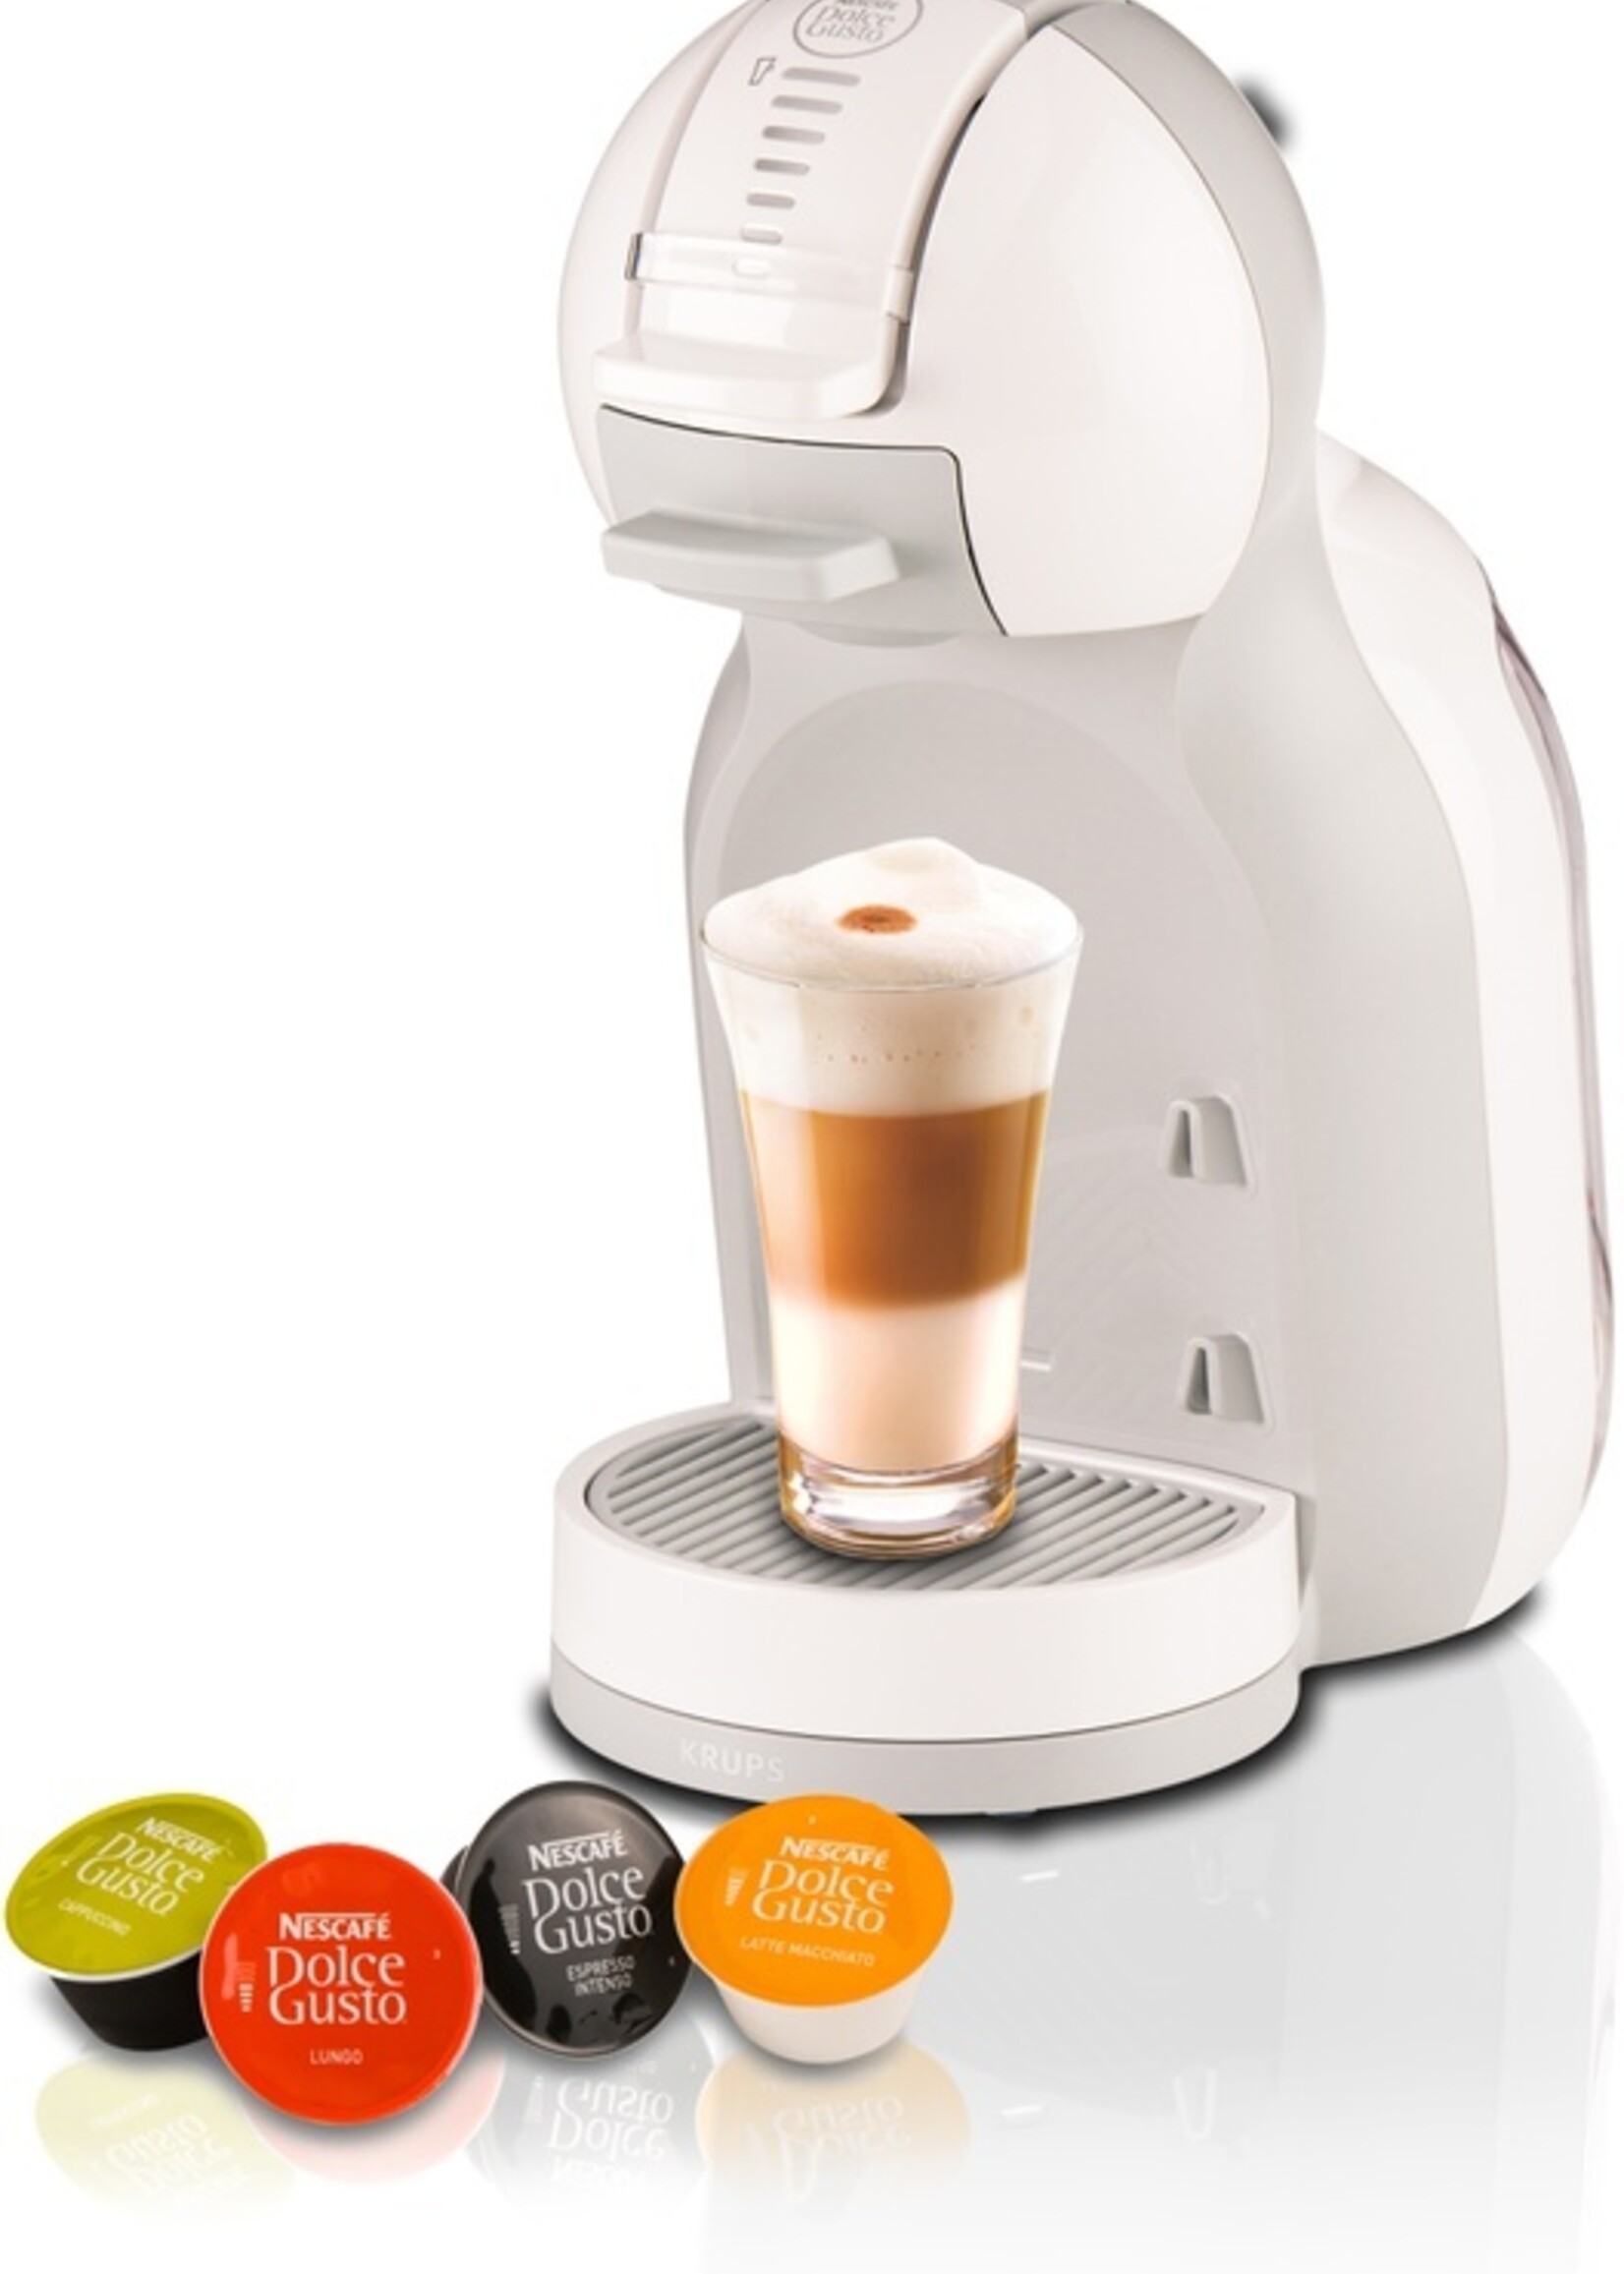 Krups Dolce Gusto MiniMe KP1201 - Koffiemachine